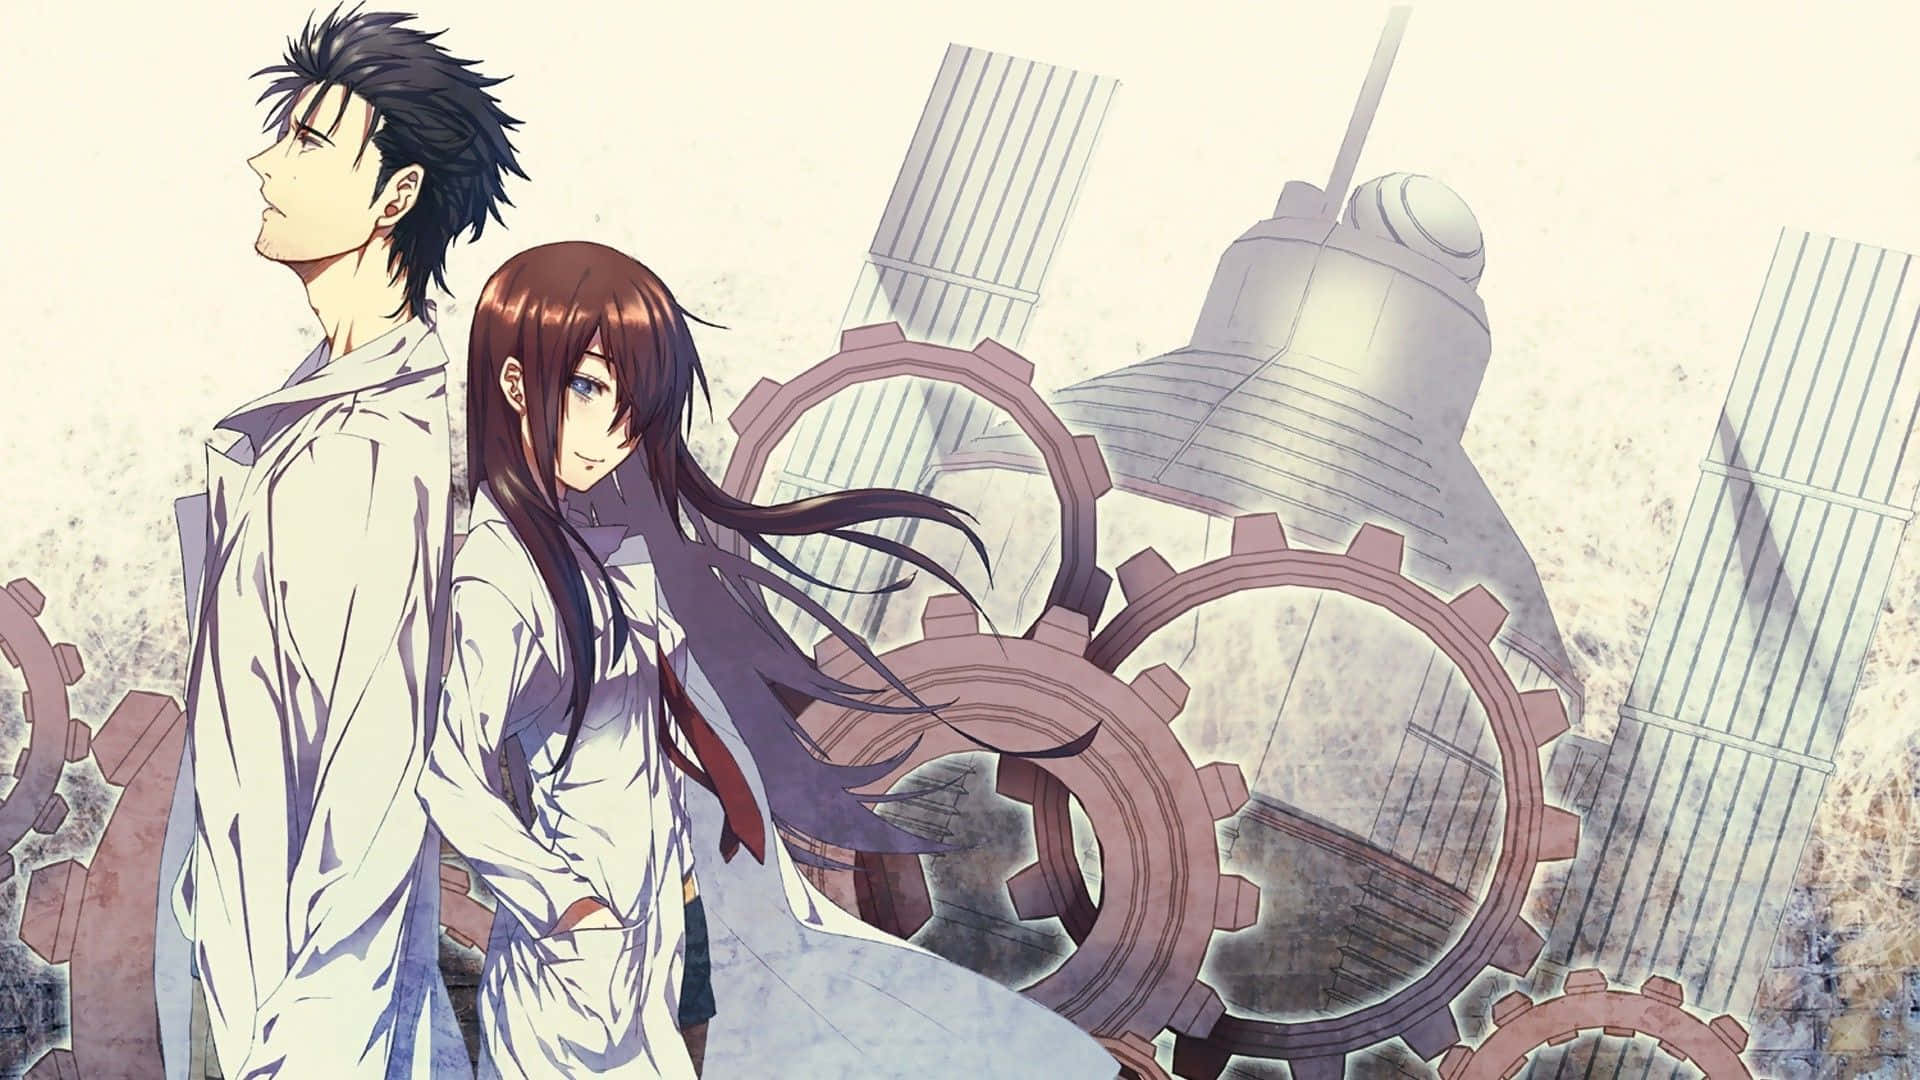 Rintaro Okabe - The Time-Travelling Scientist Wallpaper